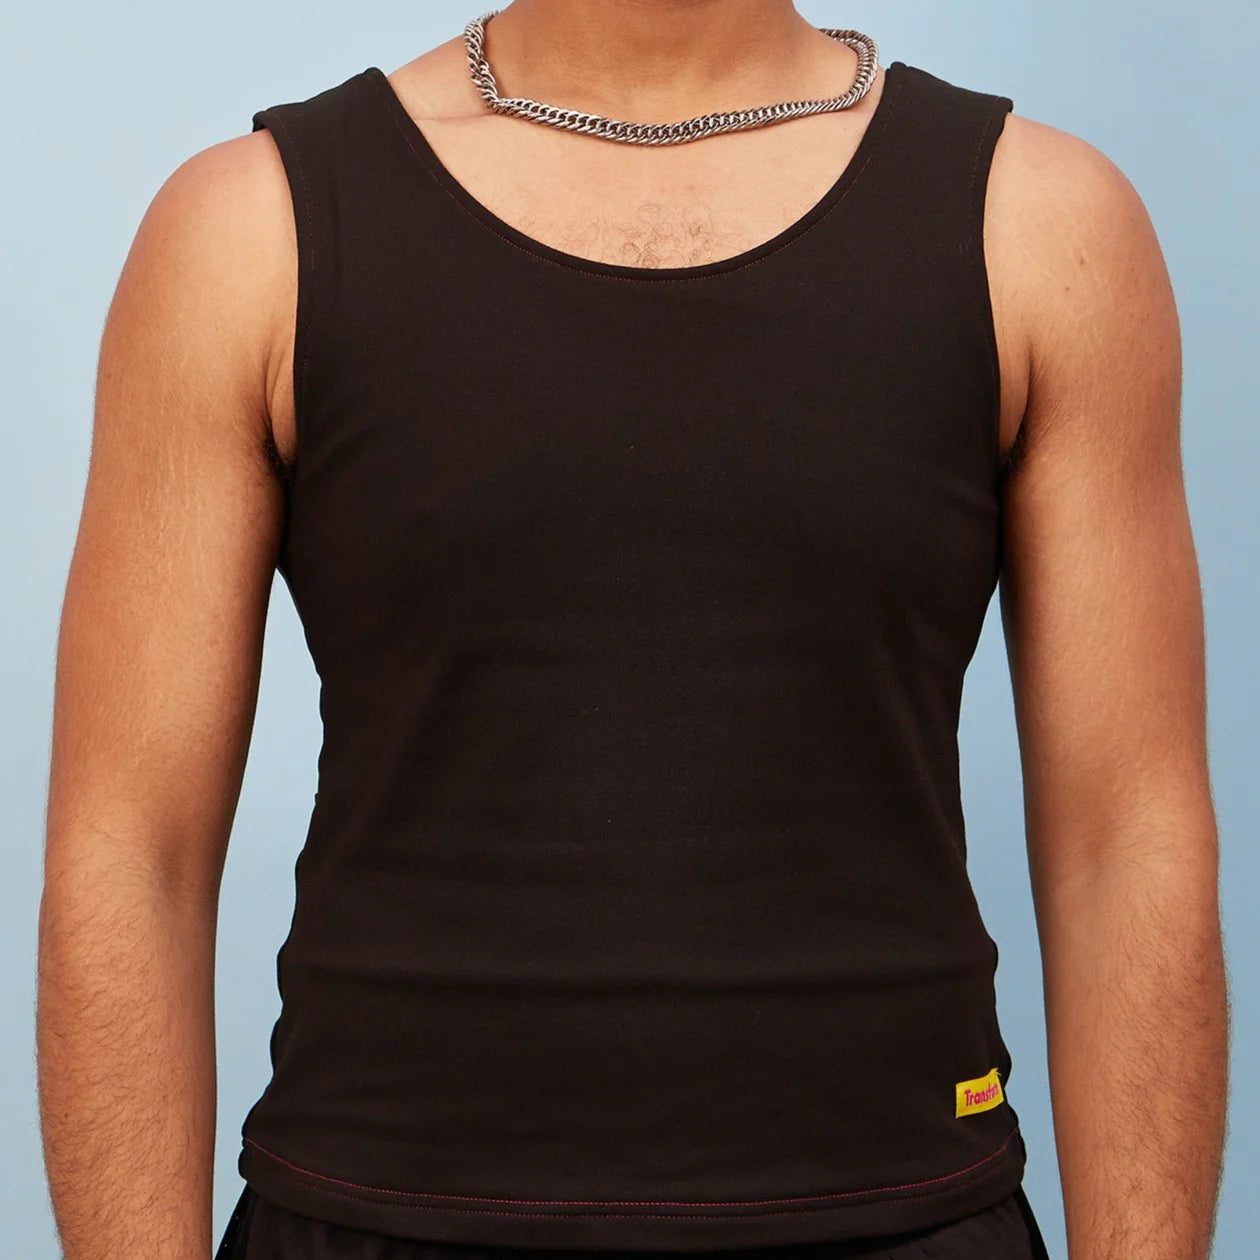 Person wearing a black chest binder tank top